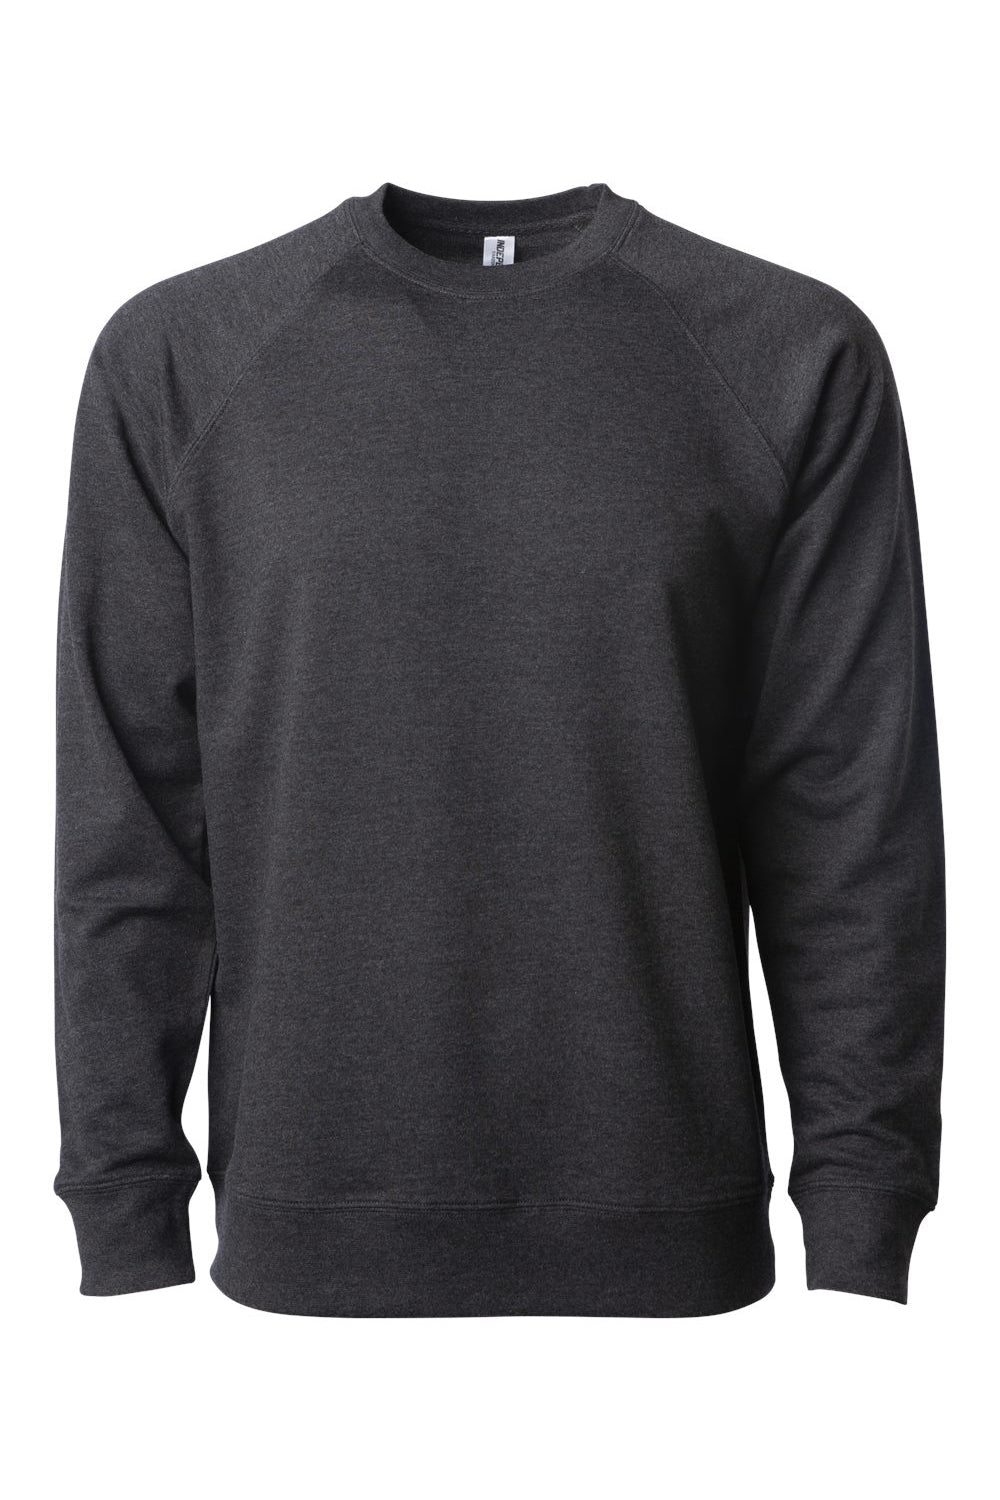 Independent Trading Co. SS1000C Mens Icon Loopback Terry Crewneck Sweatshirt Heather Charcoal Grey Flat Front